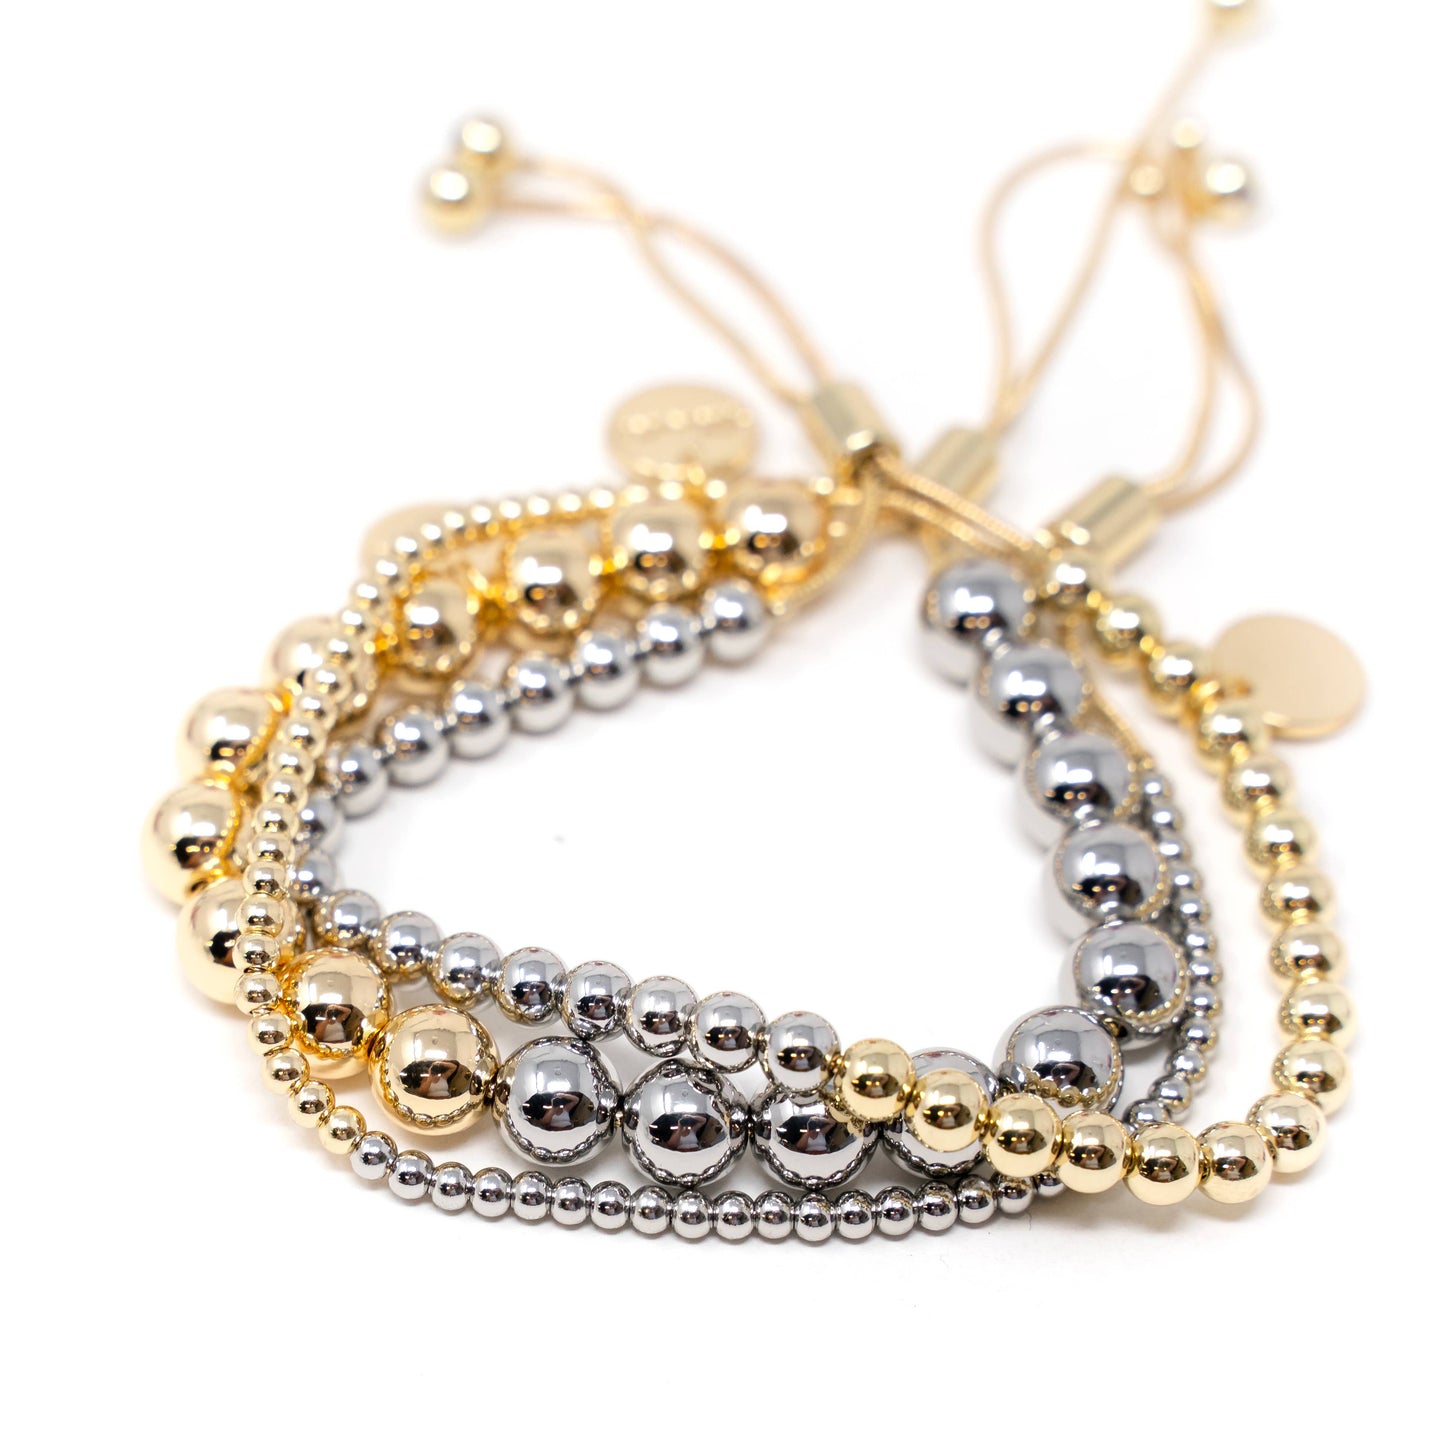 A stack of three two tone adjustable bracelets, with gold and silver beads